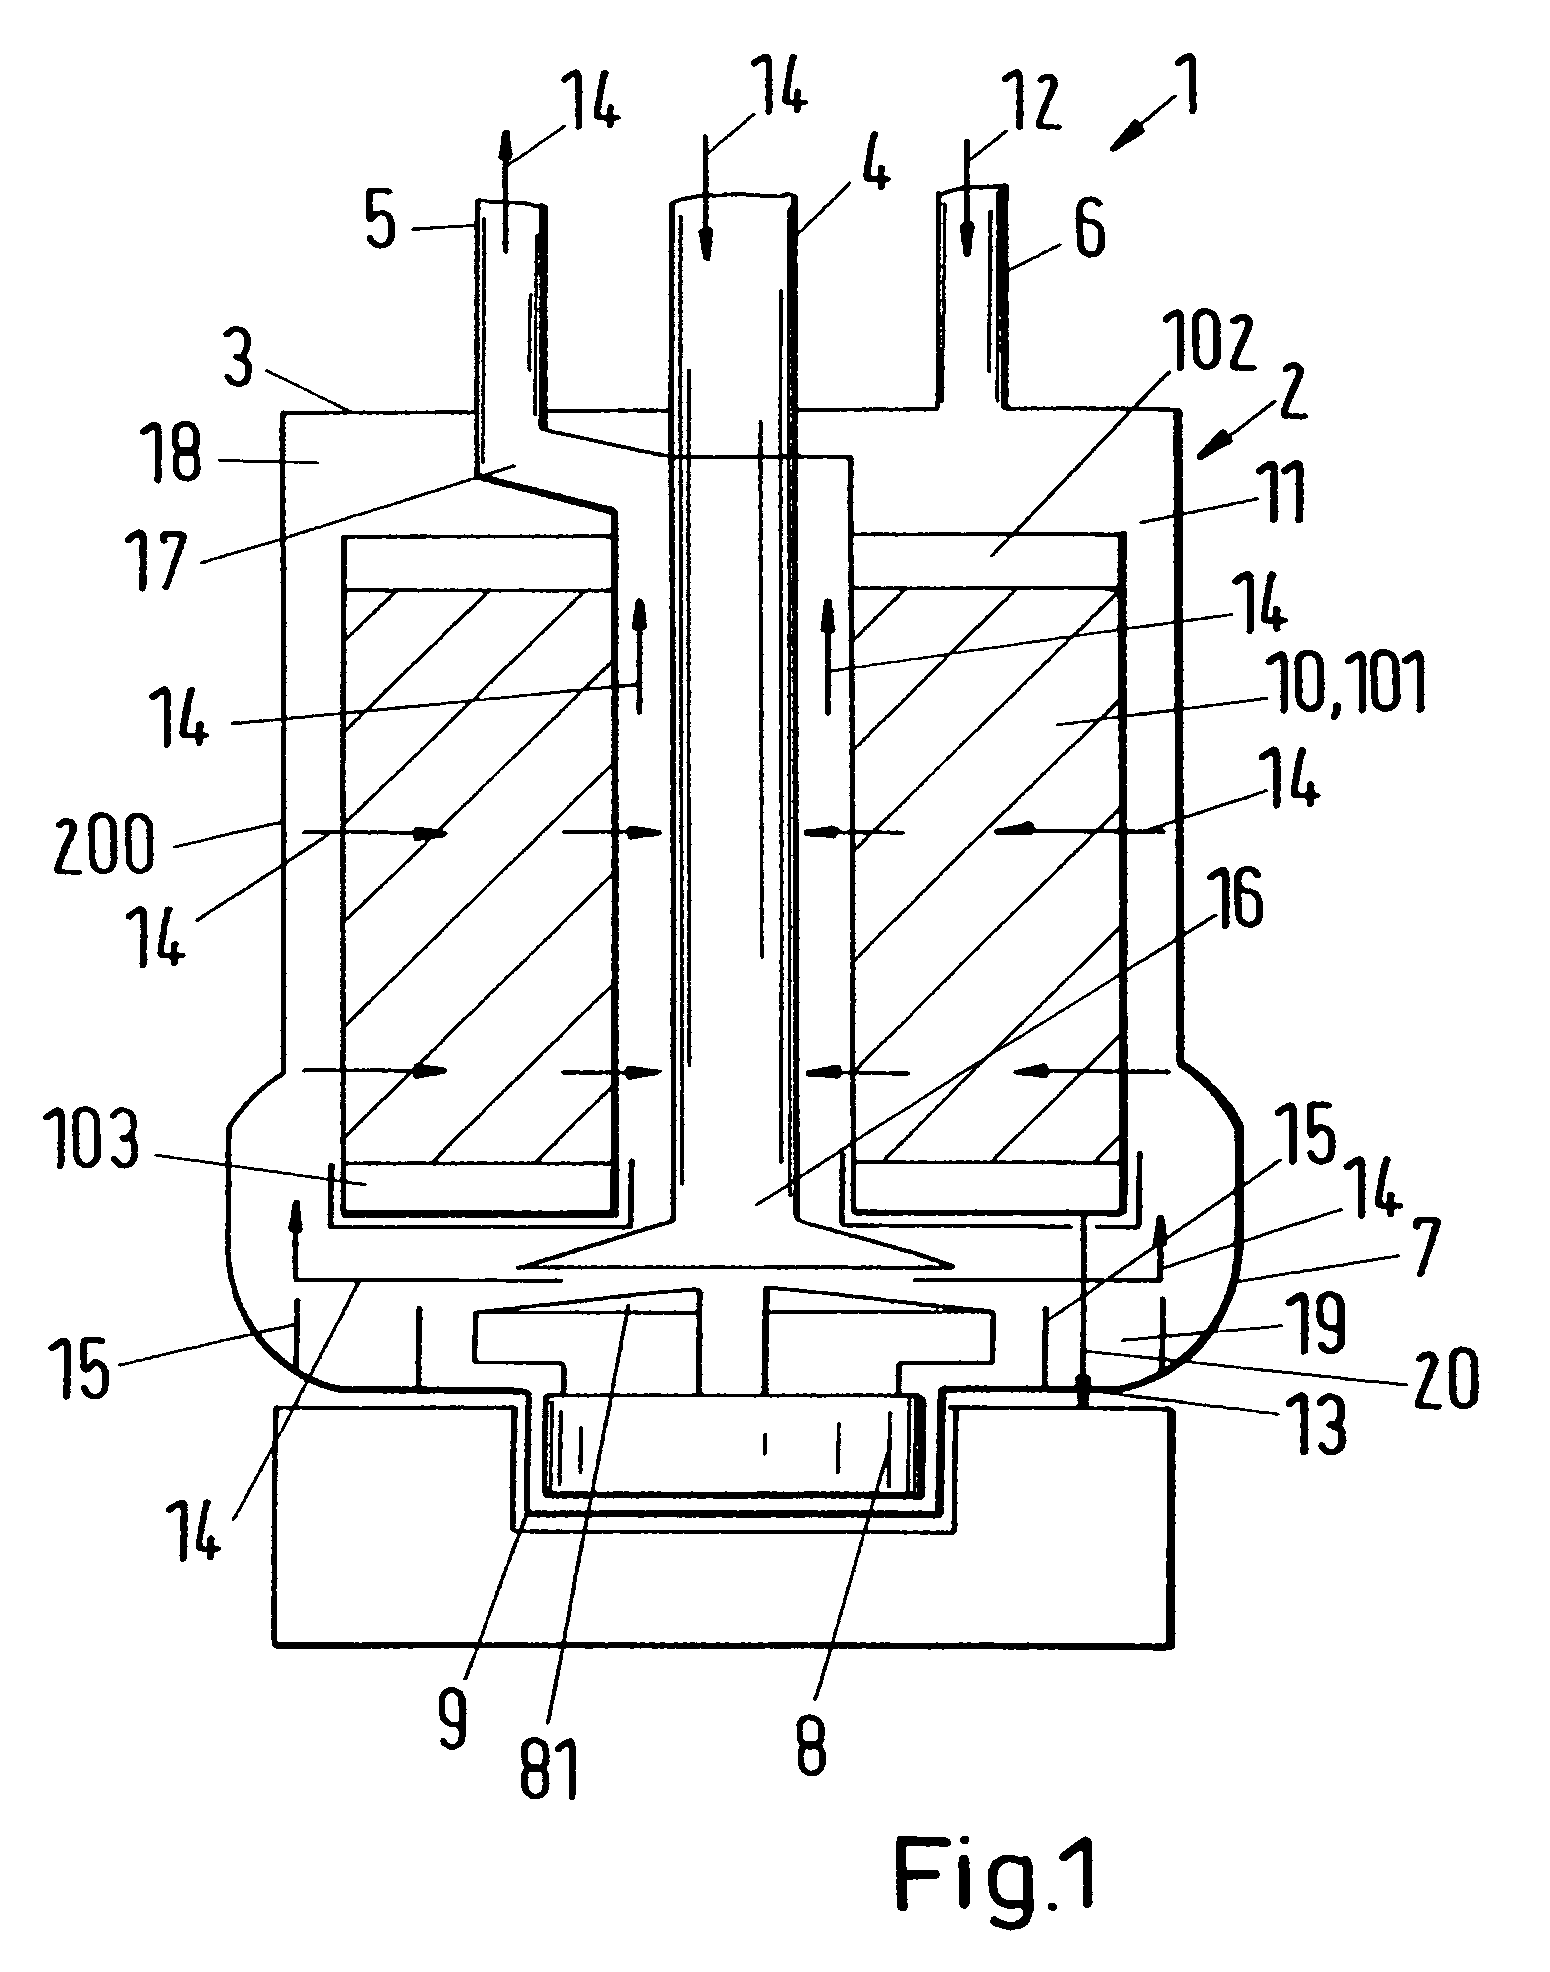 Integrated centrifugal blood pump-oxygenator, an extracorporeal life support system and a method of de-bubbling and priming an extracorporeal life support system